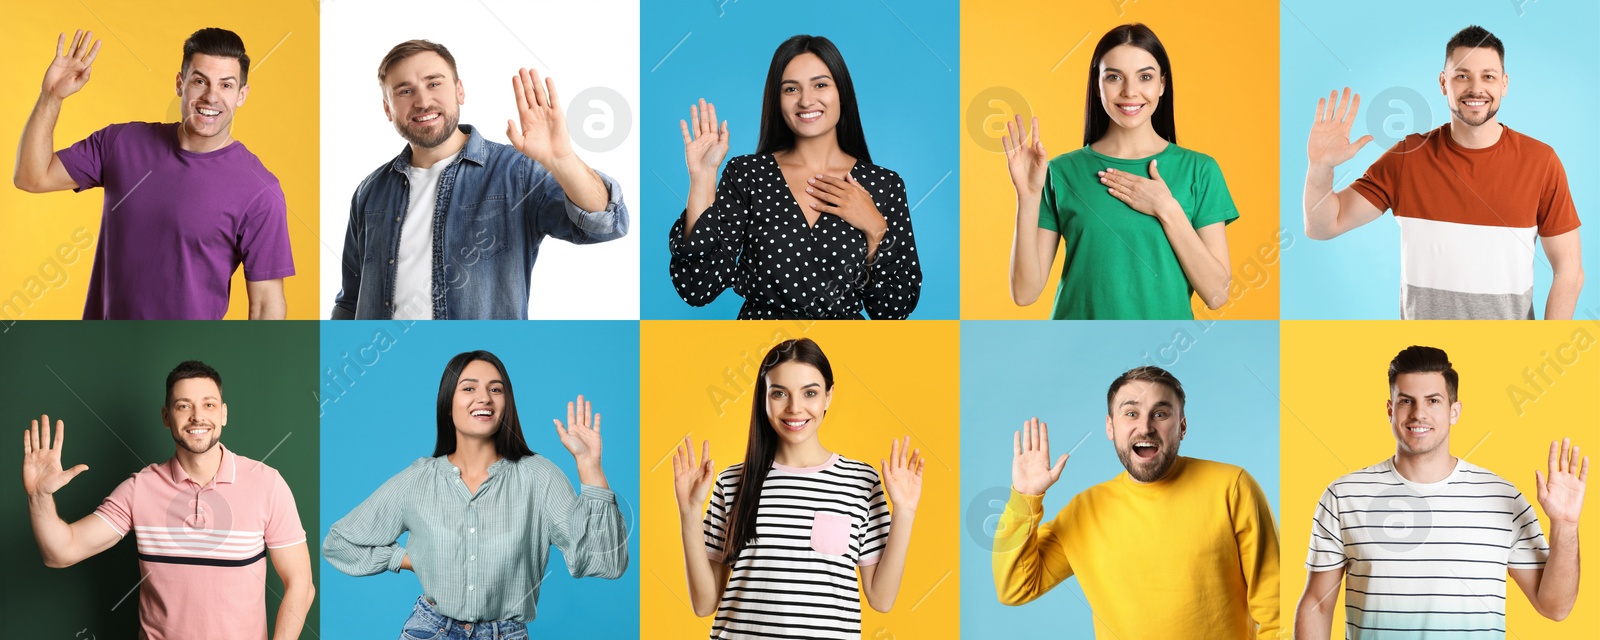 Image of Collage with photos of cheerful people showing hello gesture on different color backgrounds. Banner design